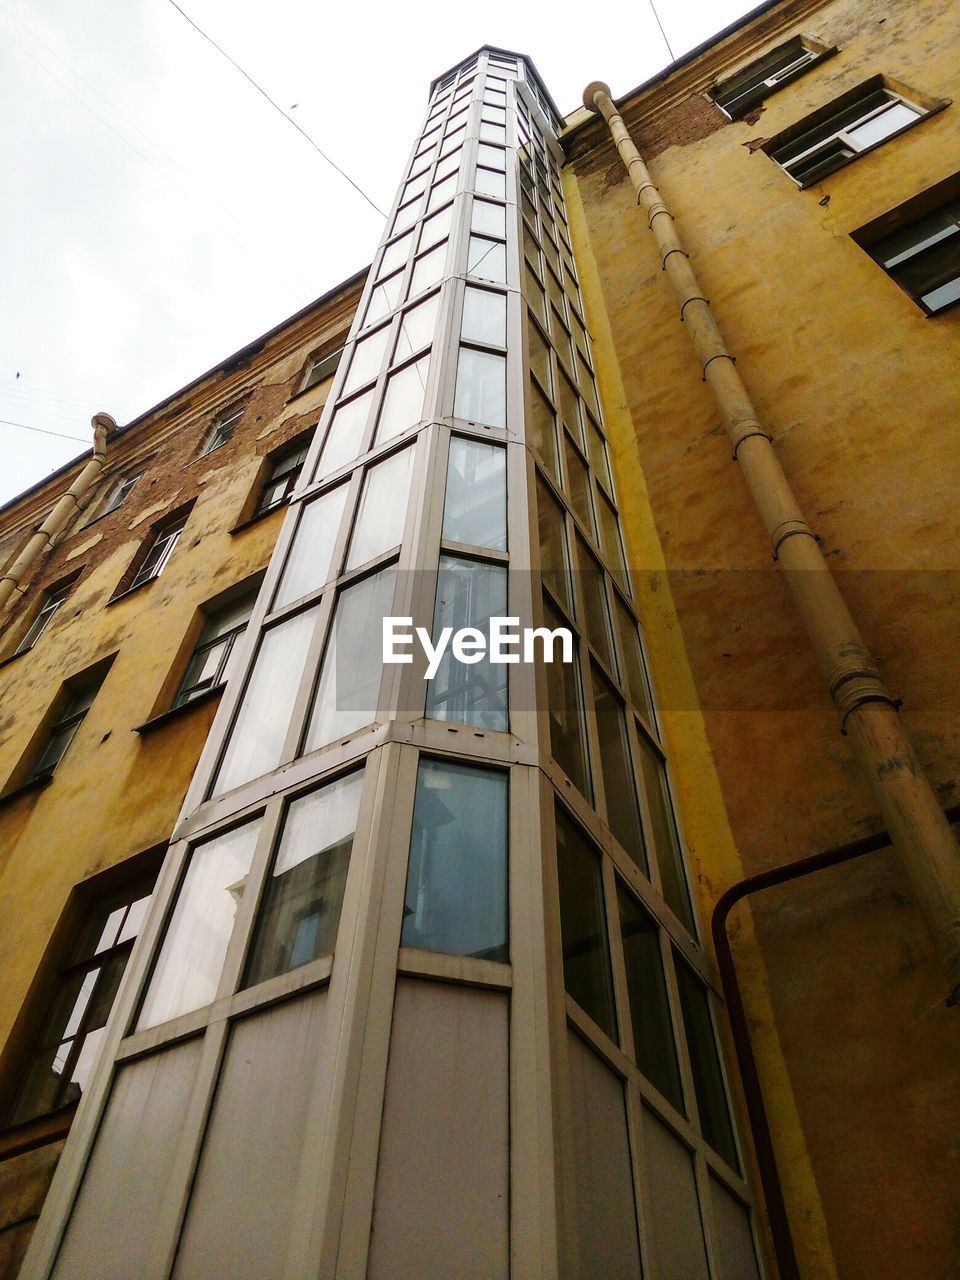 Low angle view of elevator in building